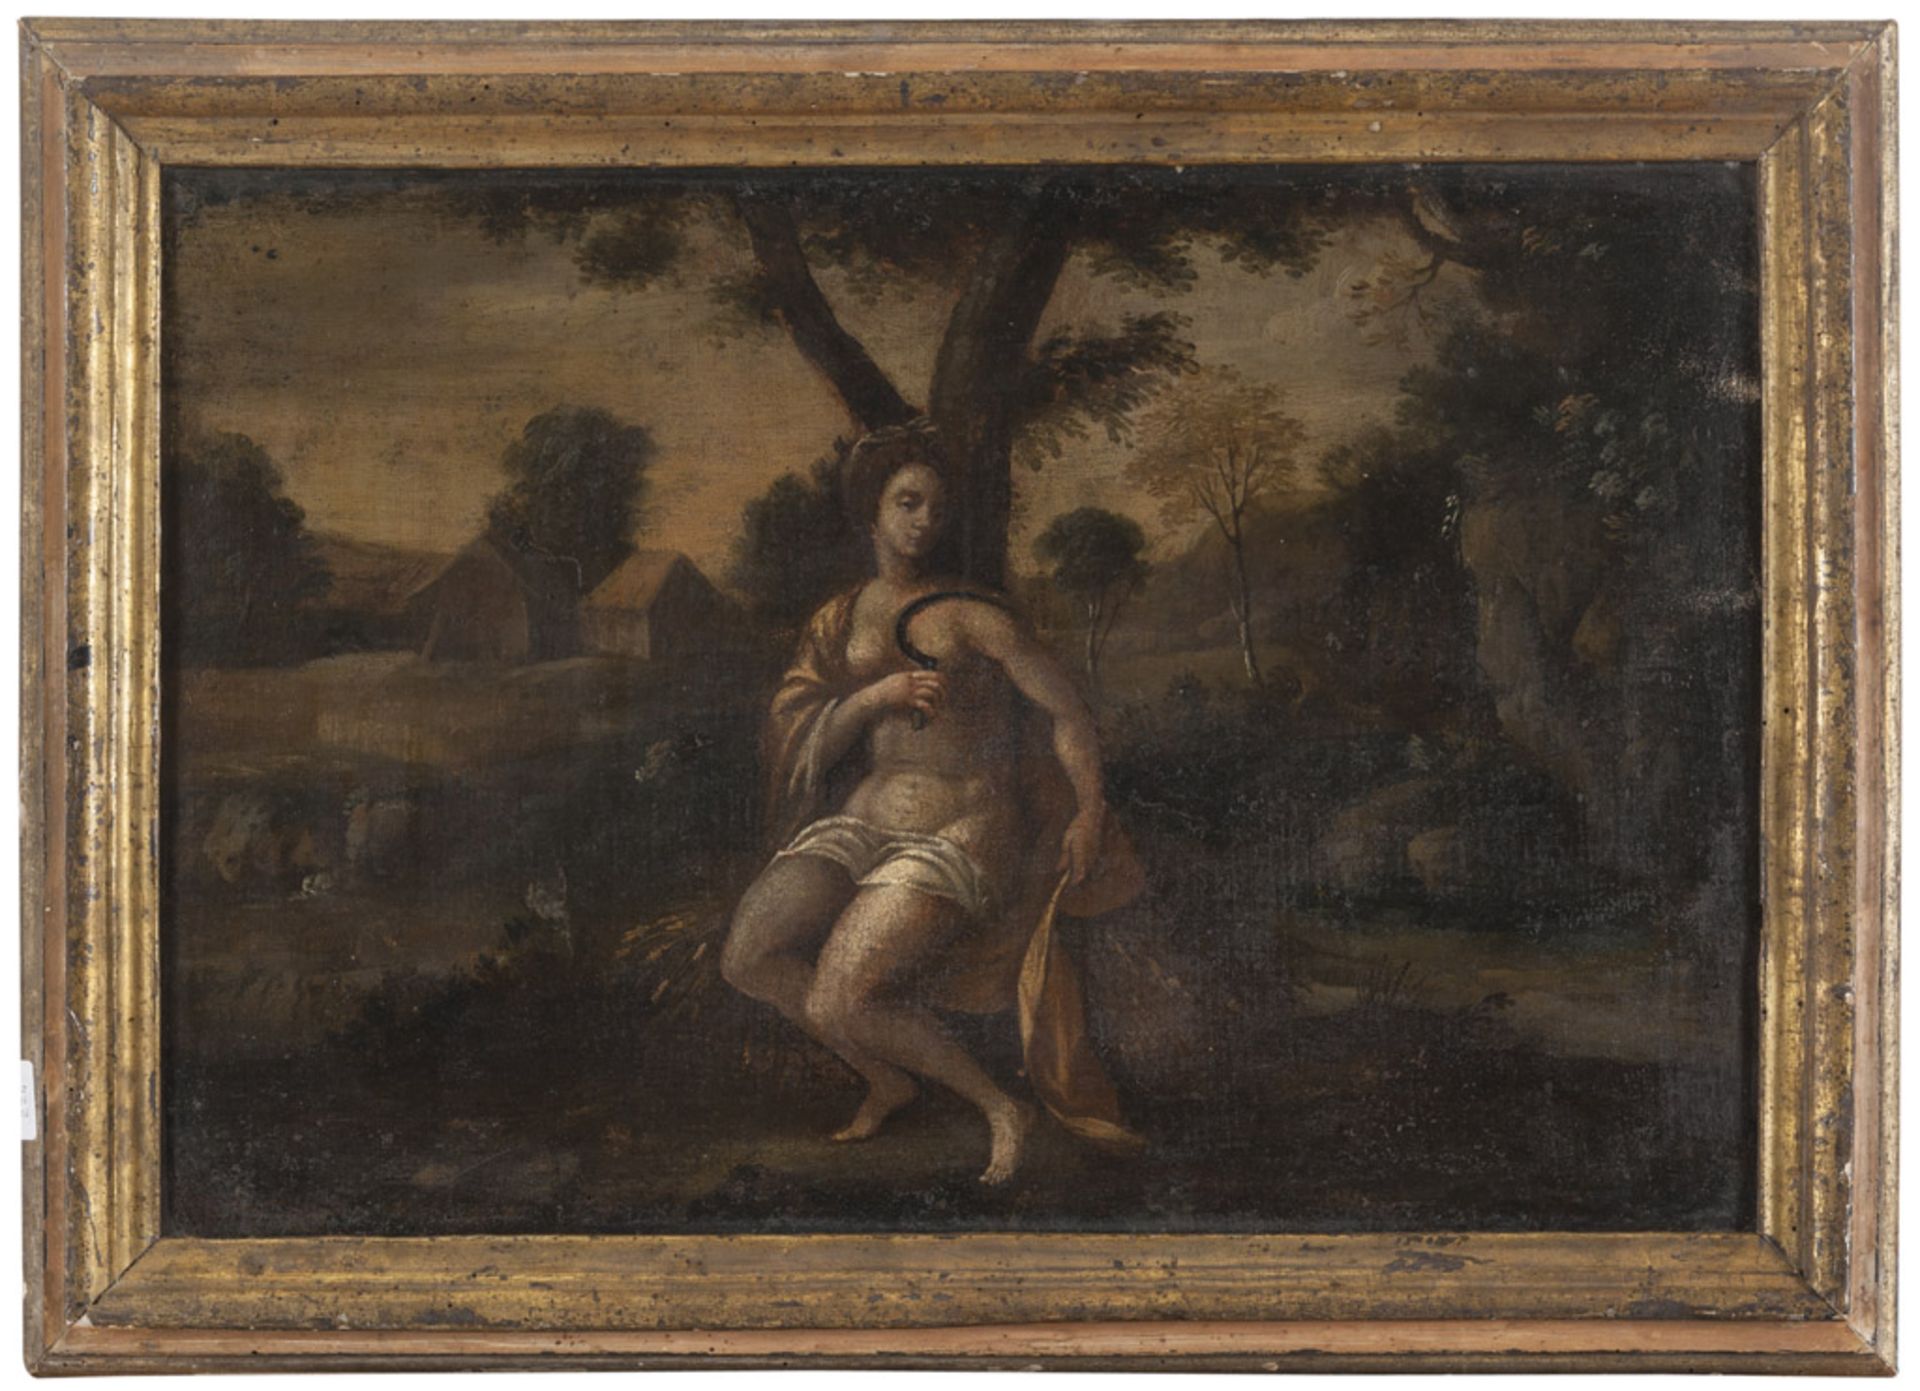 VENETIAN PAINTER, EARLY 17TH CENTURY ALLEGORY OF THE SUMMER Oil on canvas cm. 38 x 55 Gilded frame